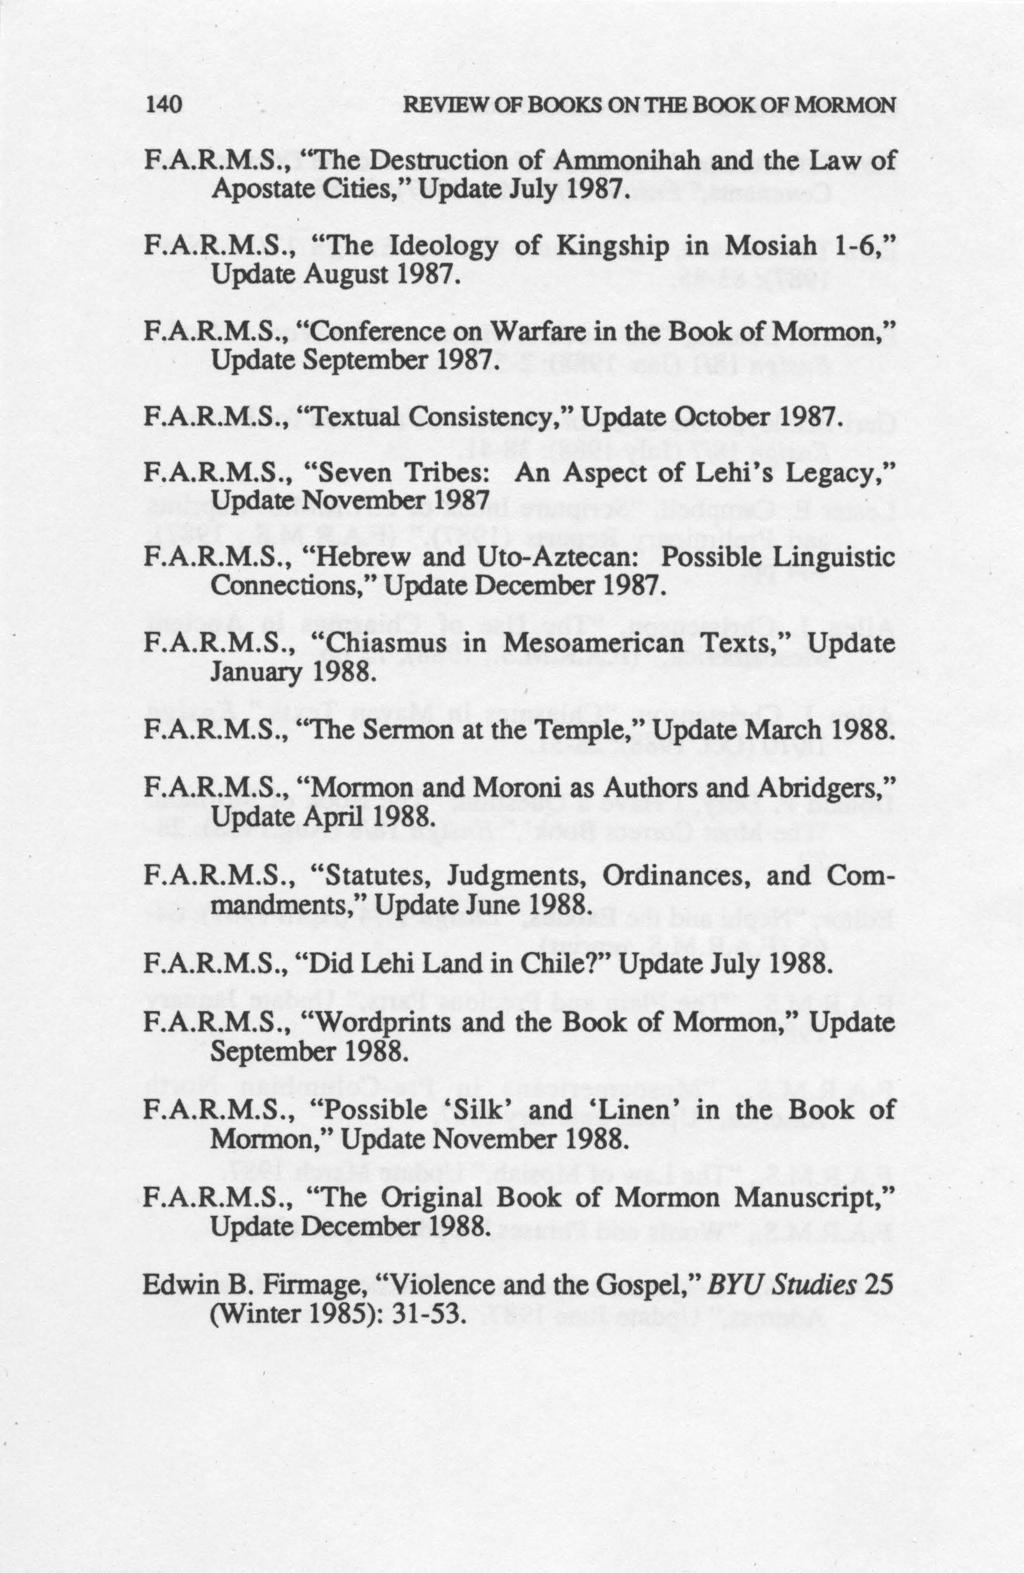 140 REVIEW OF BOOKS ON THE BOOK OF MORMON F.A.R.M.S., "The Destruction of Ammonihah and the Law of Apostate Cities," Update July 1987. F.A.R.M.S., "The Ideology of Kingship in Mosiah 1-6," Update August 1987.